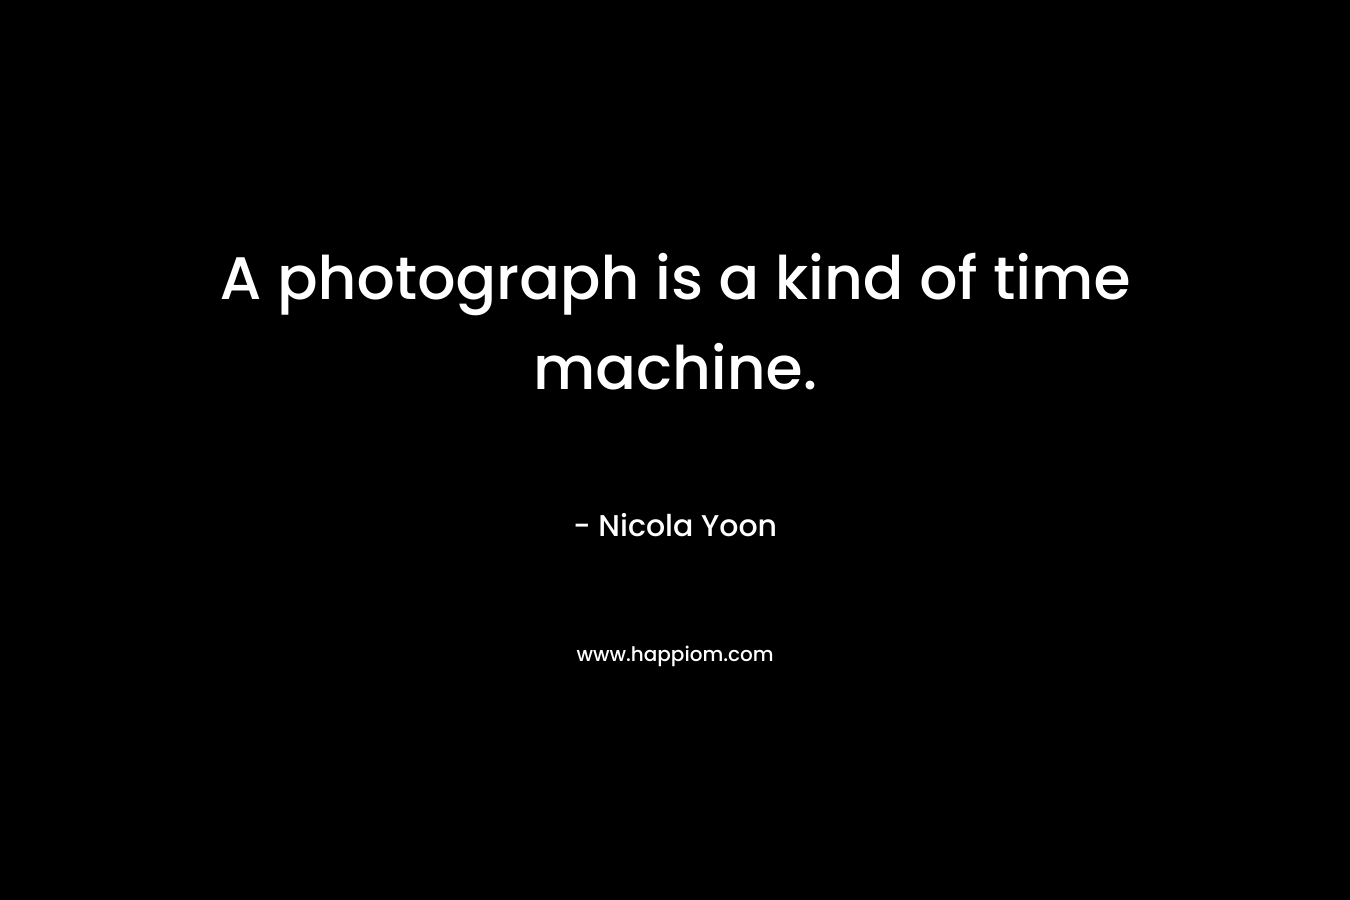 A photograph is a kind of time machine. – Nicola Yoon